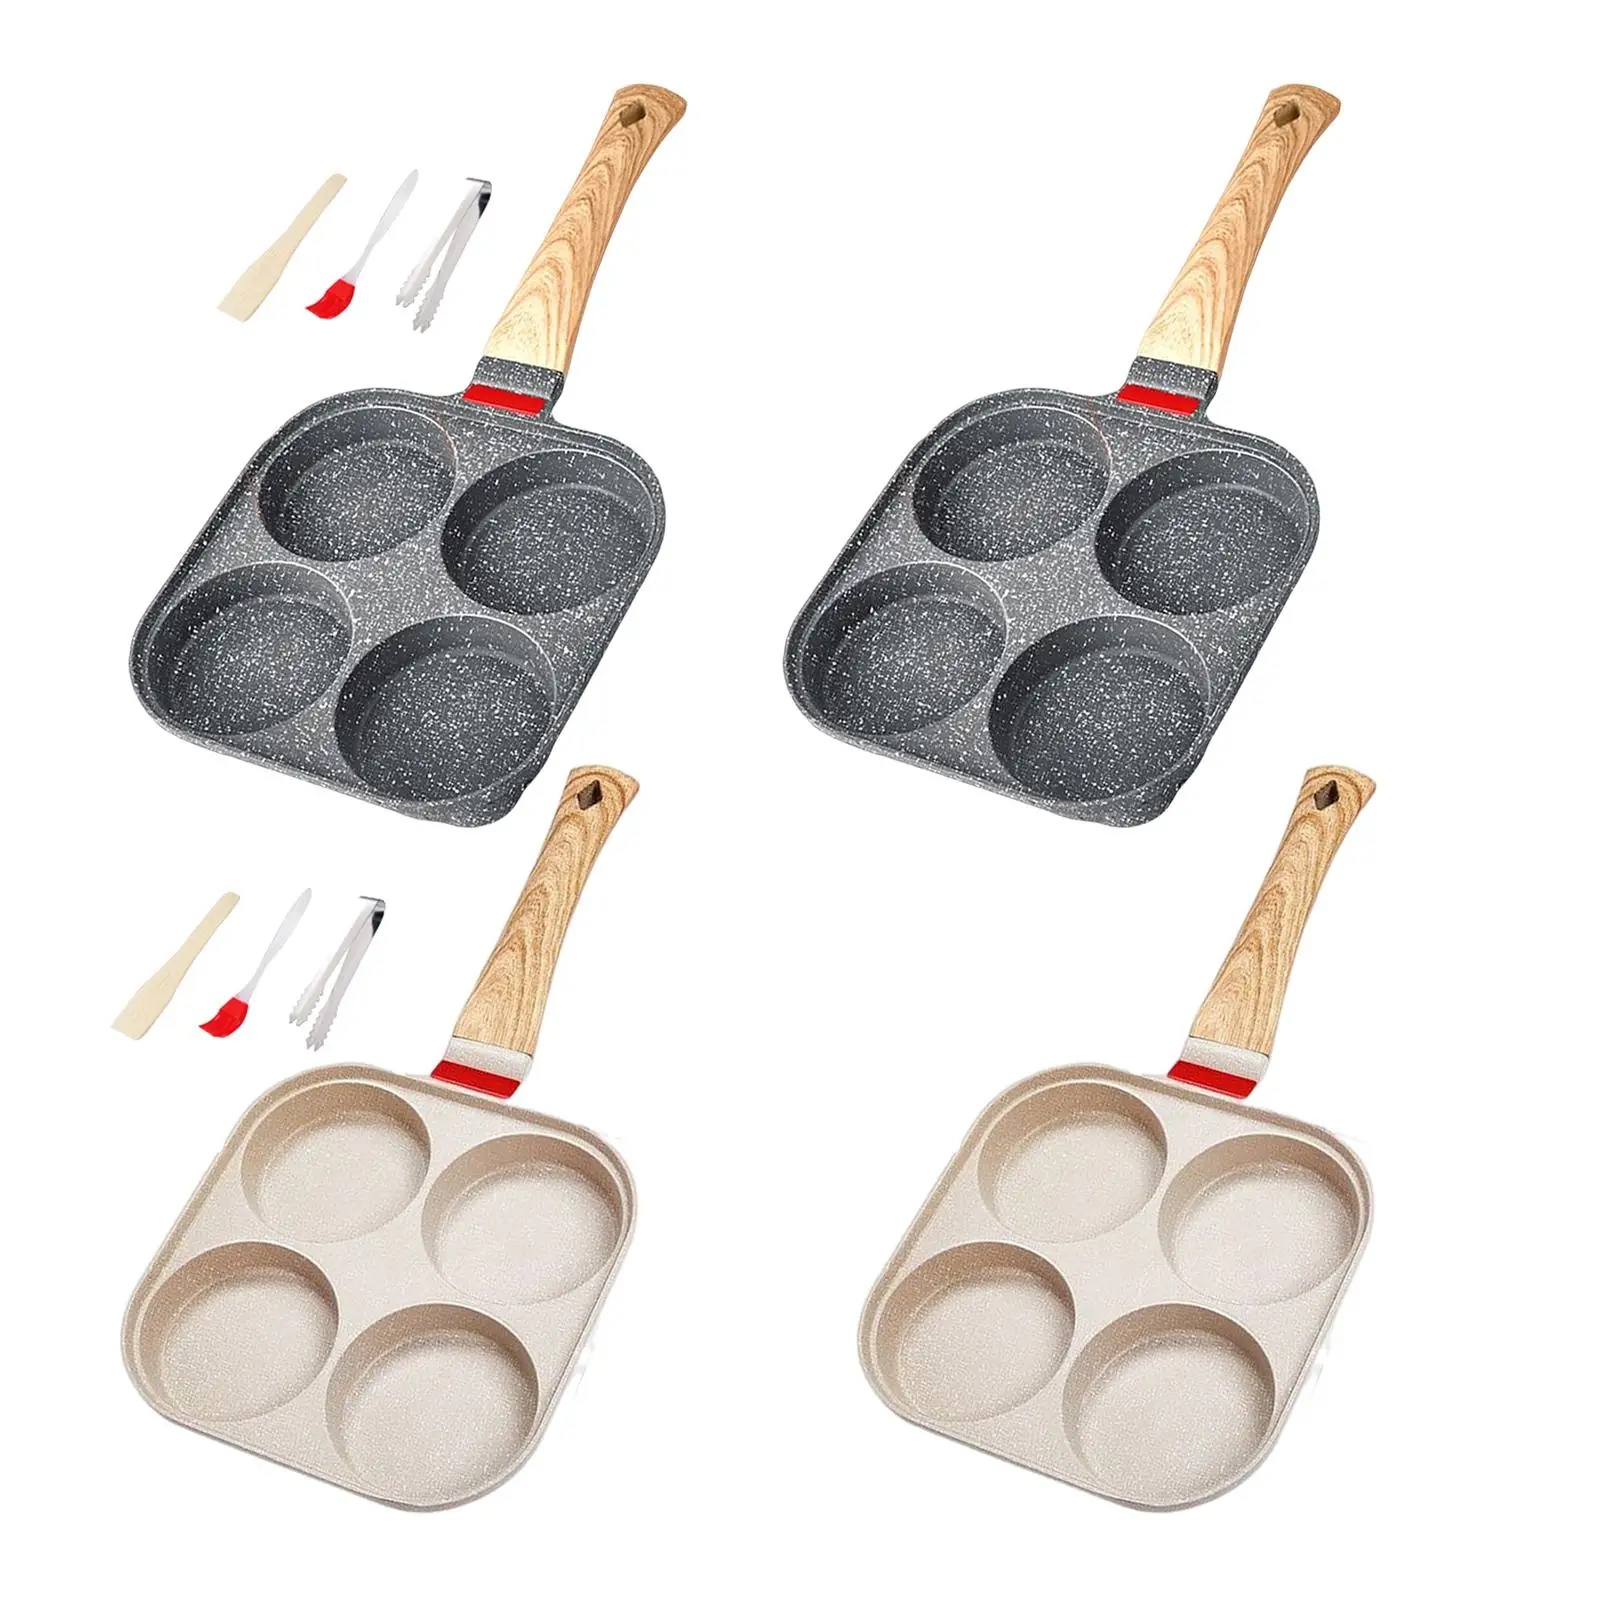 Mini Egg Pancake Frying Pan Skillet Breakfast Maker Cookware Wood Handle Omelet Kitchen Hotel Home Party